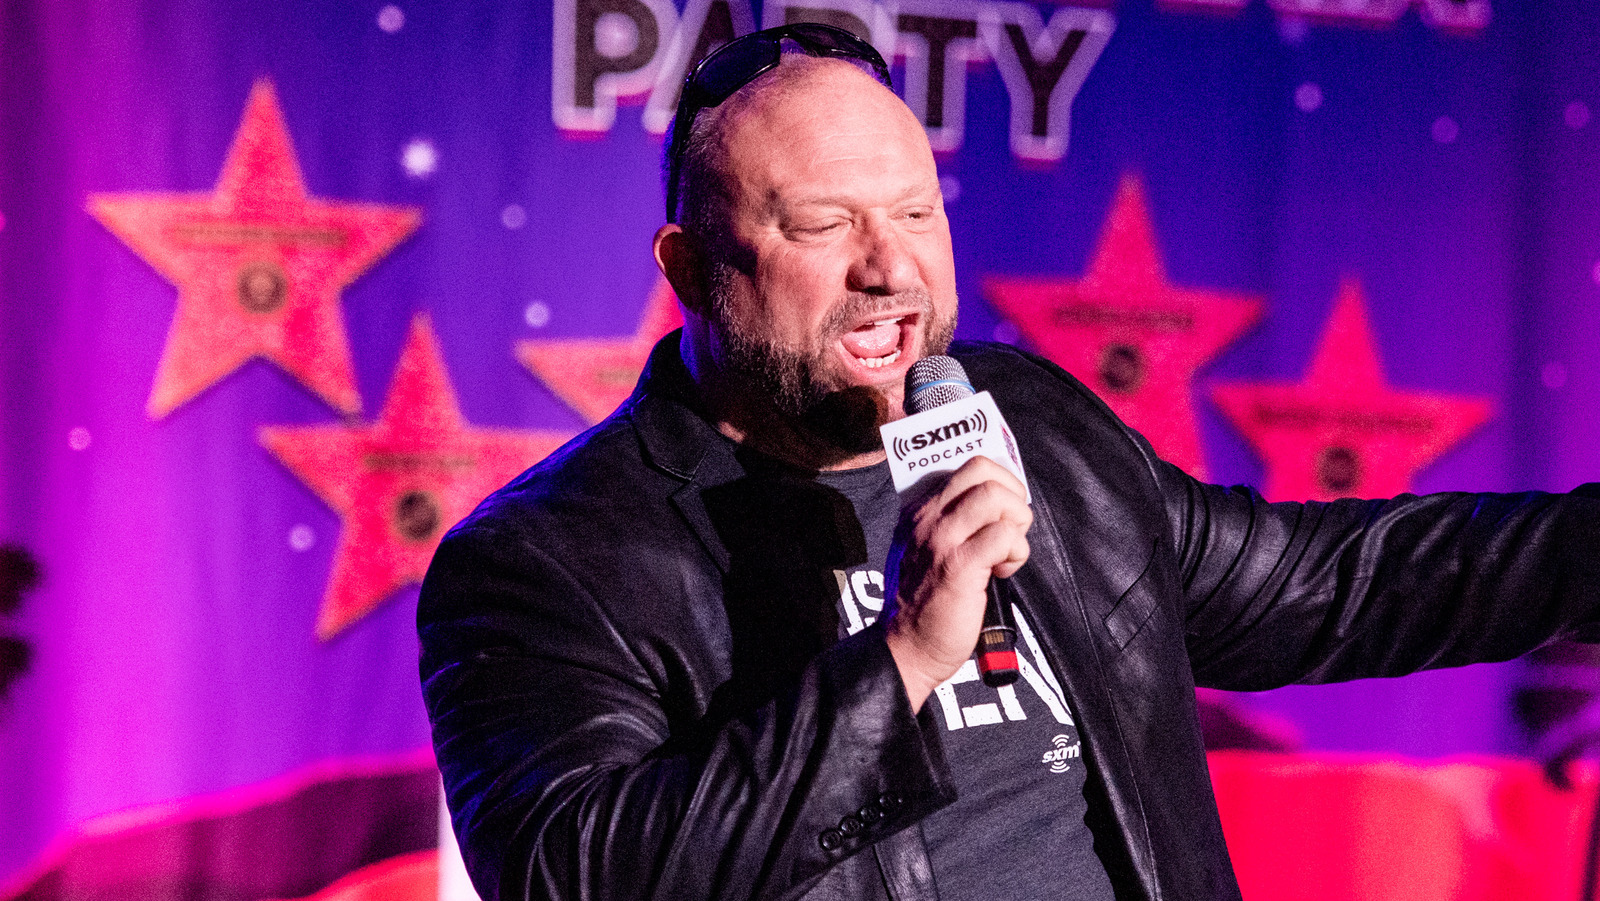 Bully Ray Explains Why ECW Was The 'Real Revolution' With No Disrespect To AEW